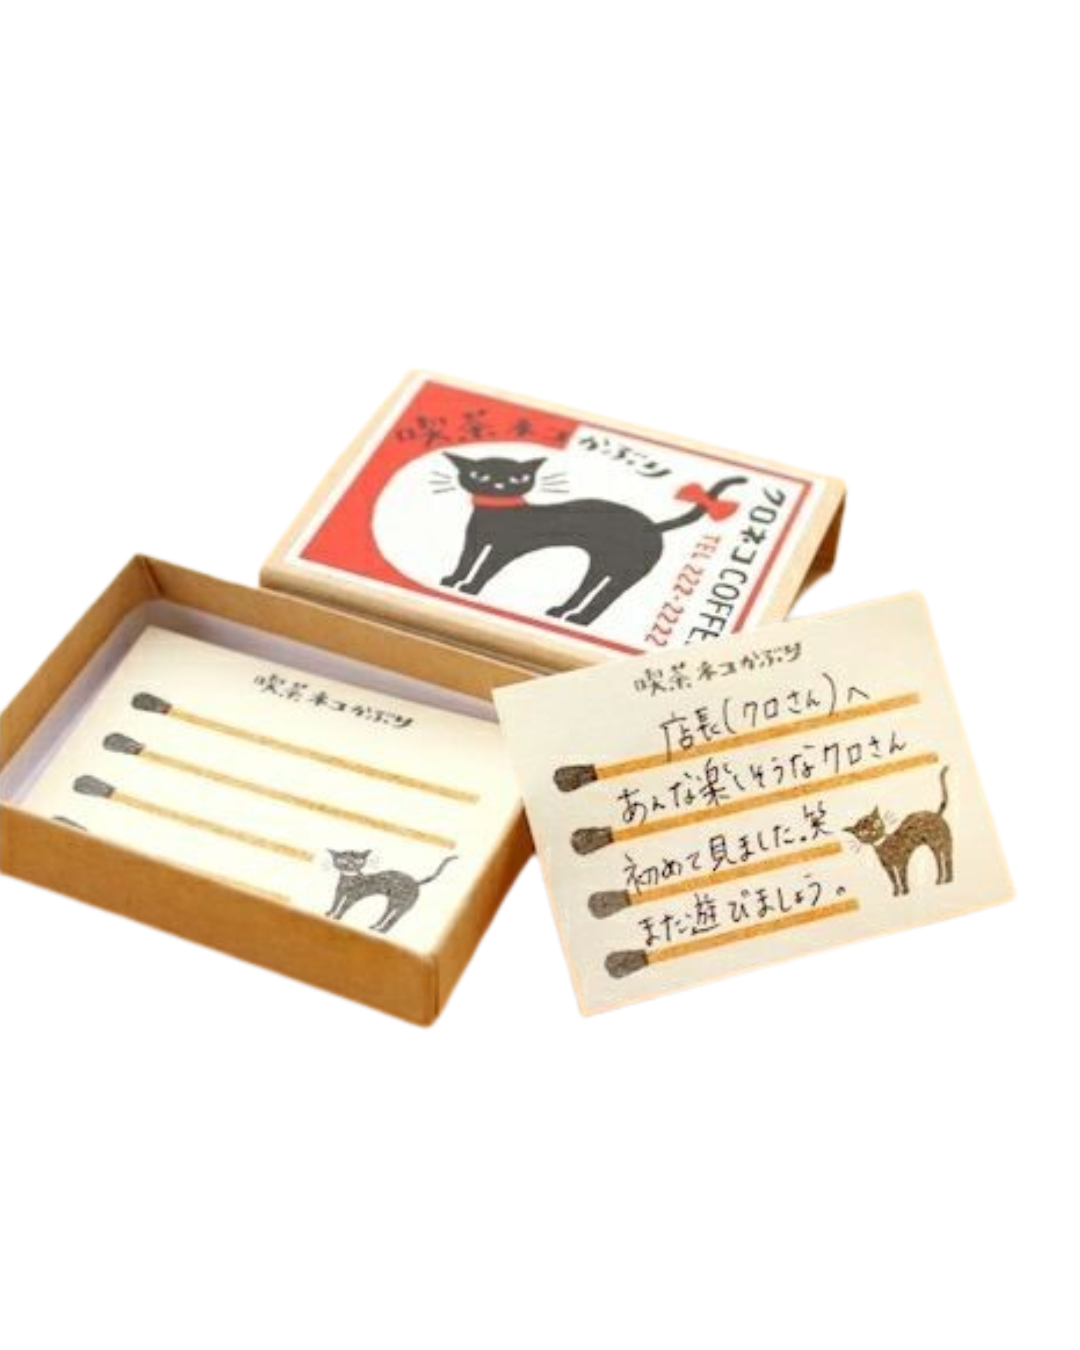 Matchbox Memo Pad - Cute and Compact!